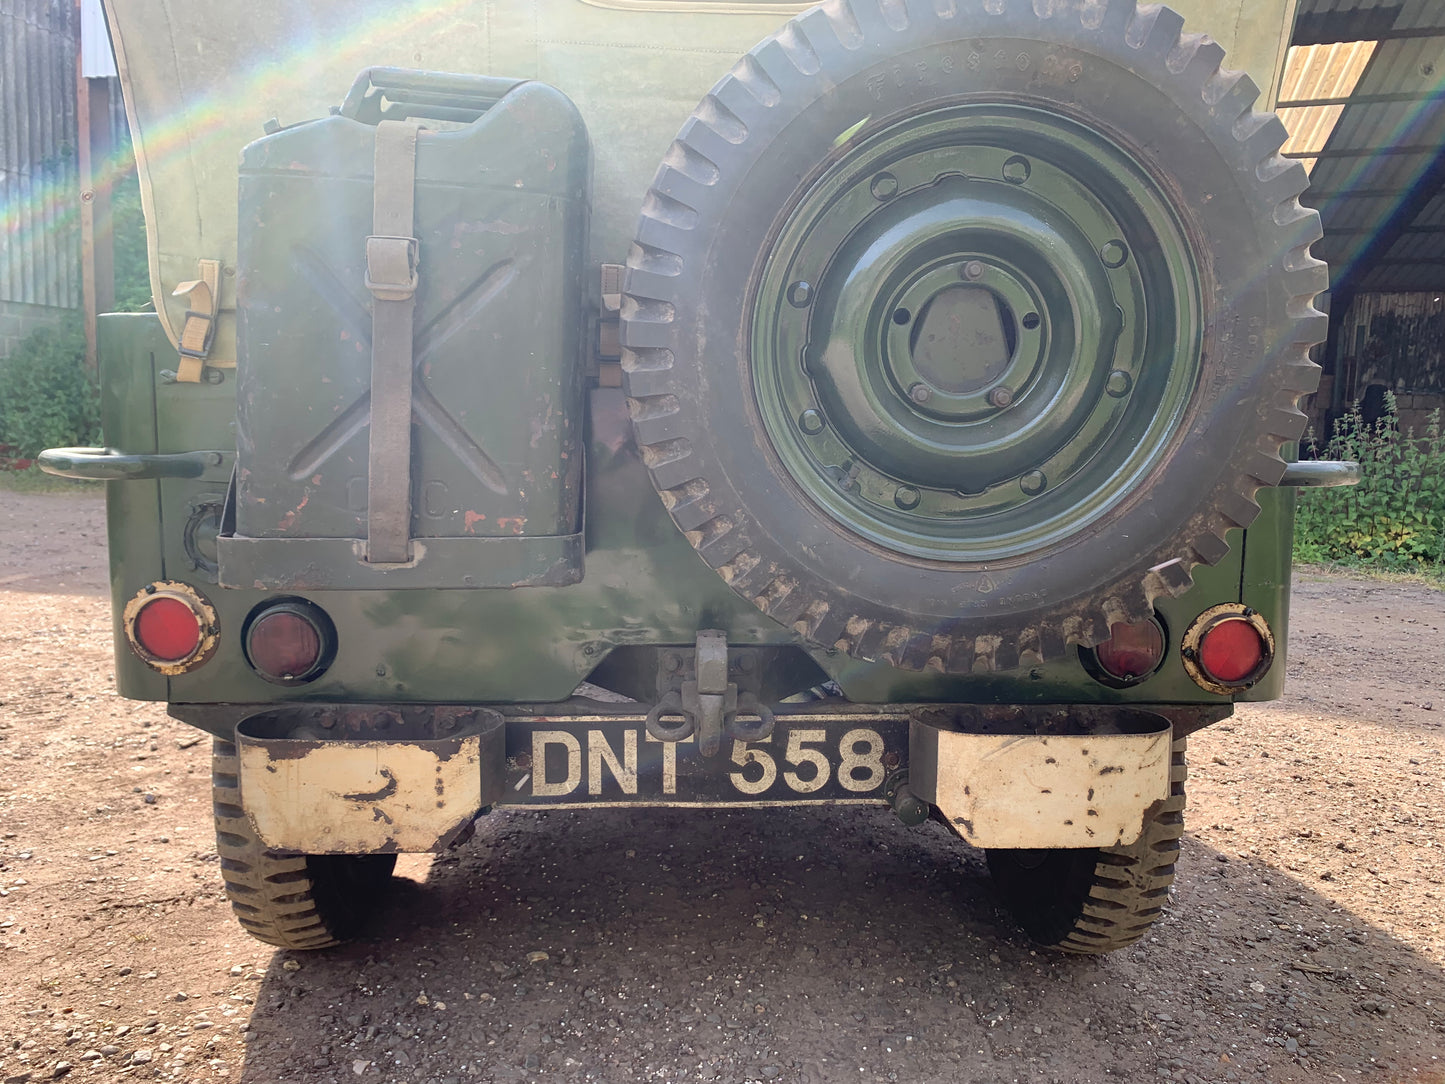 WW2 British 1943 Willys Jeep in unrestored original condition owned by the same family since 1947